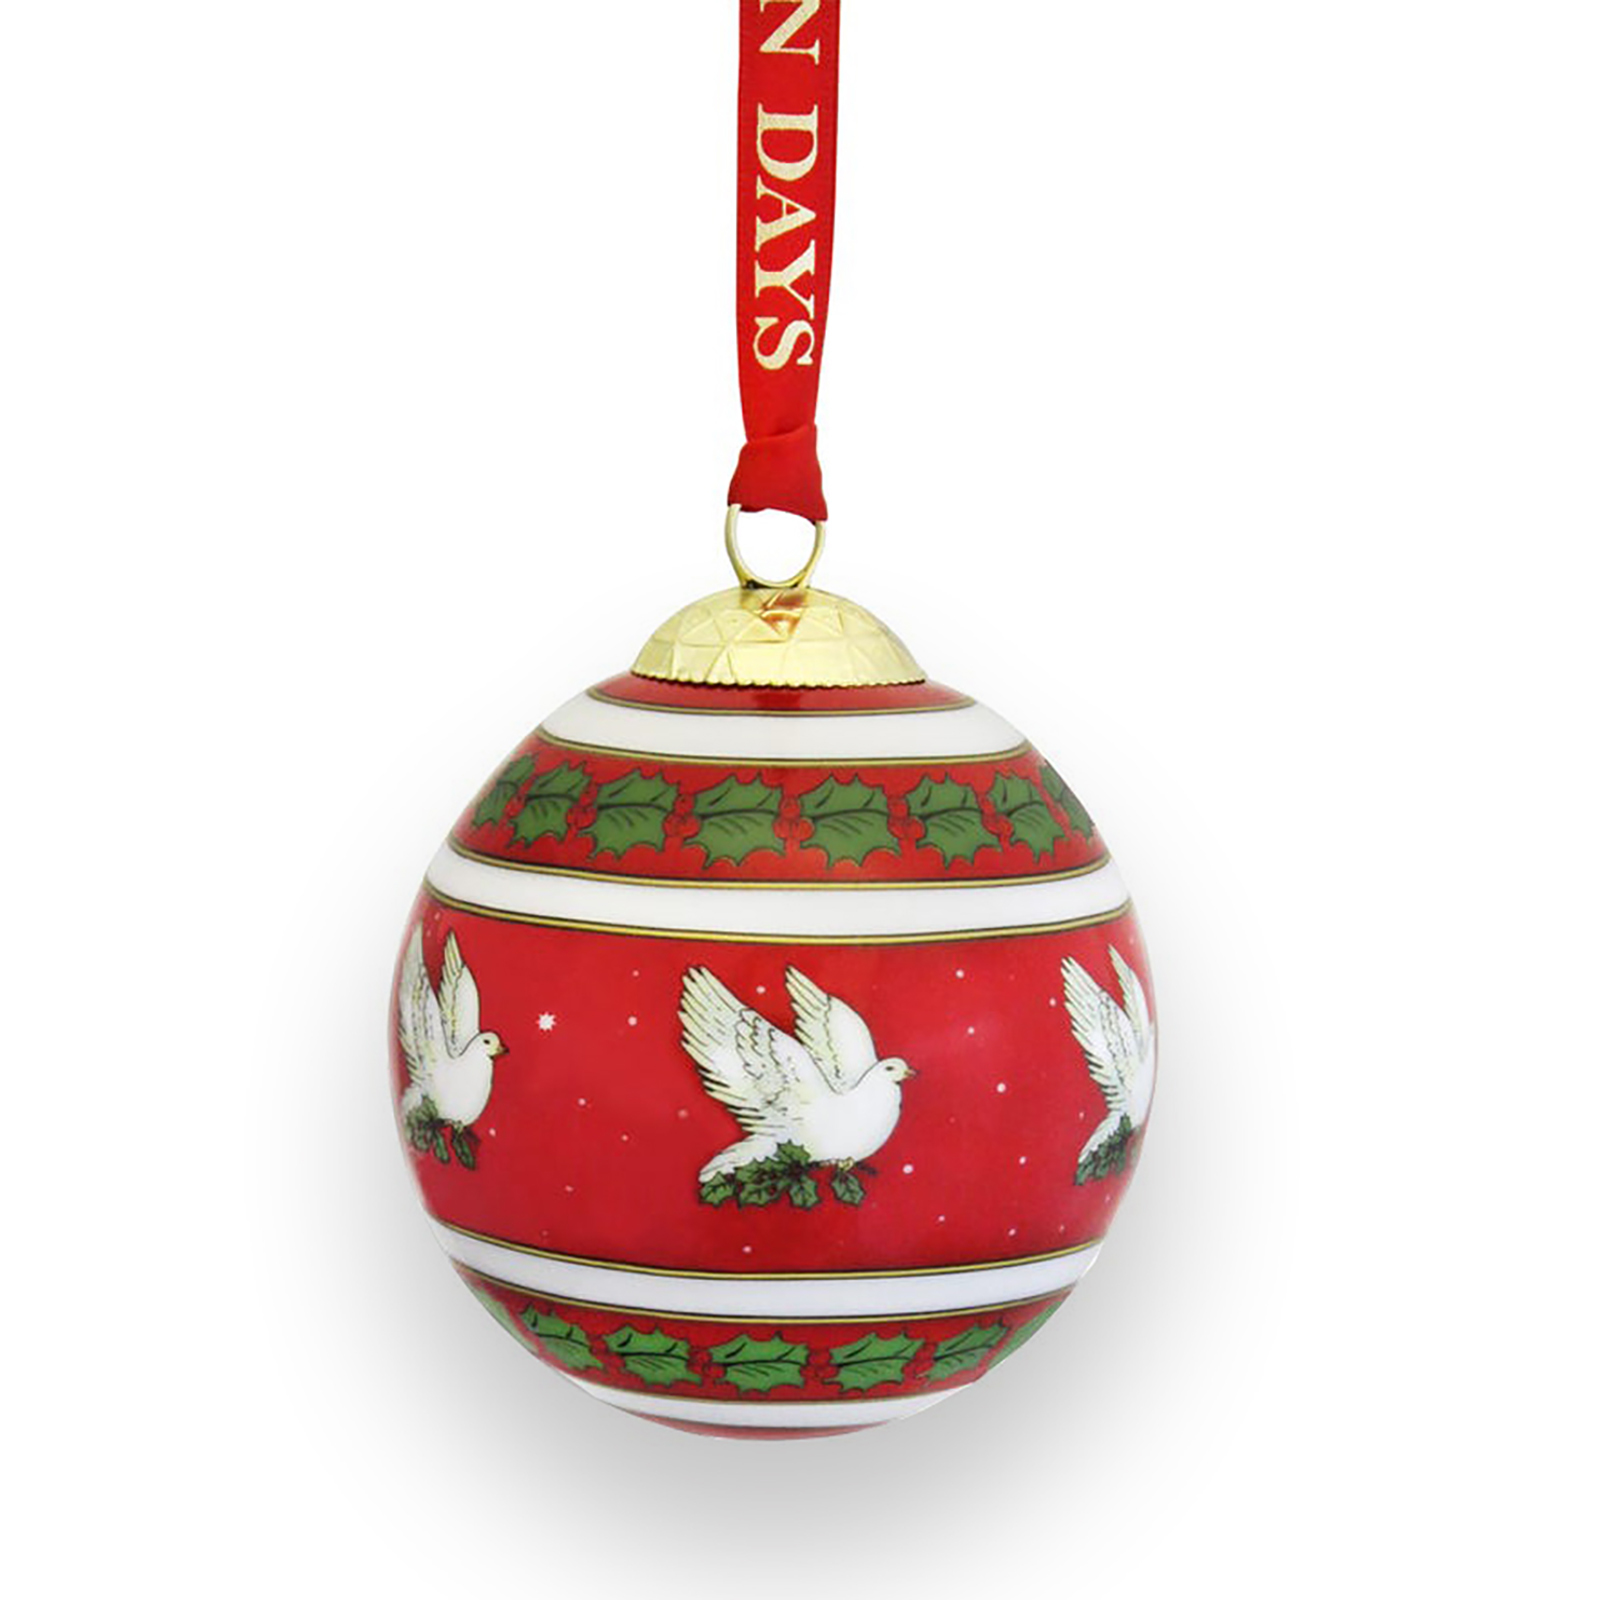 Christmas Bauble - Dove of Peace Design by Halcyon Days